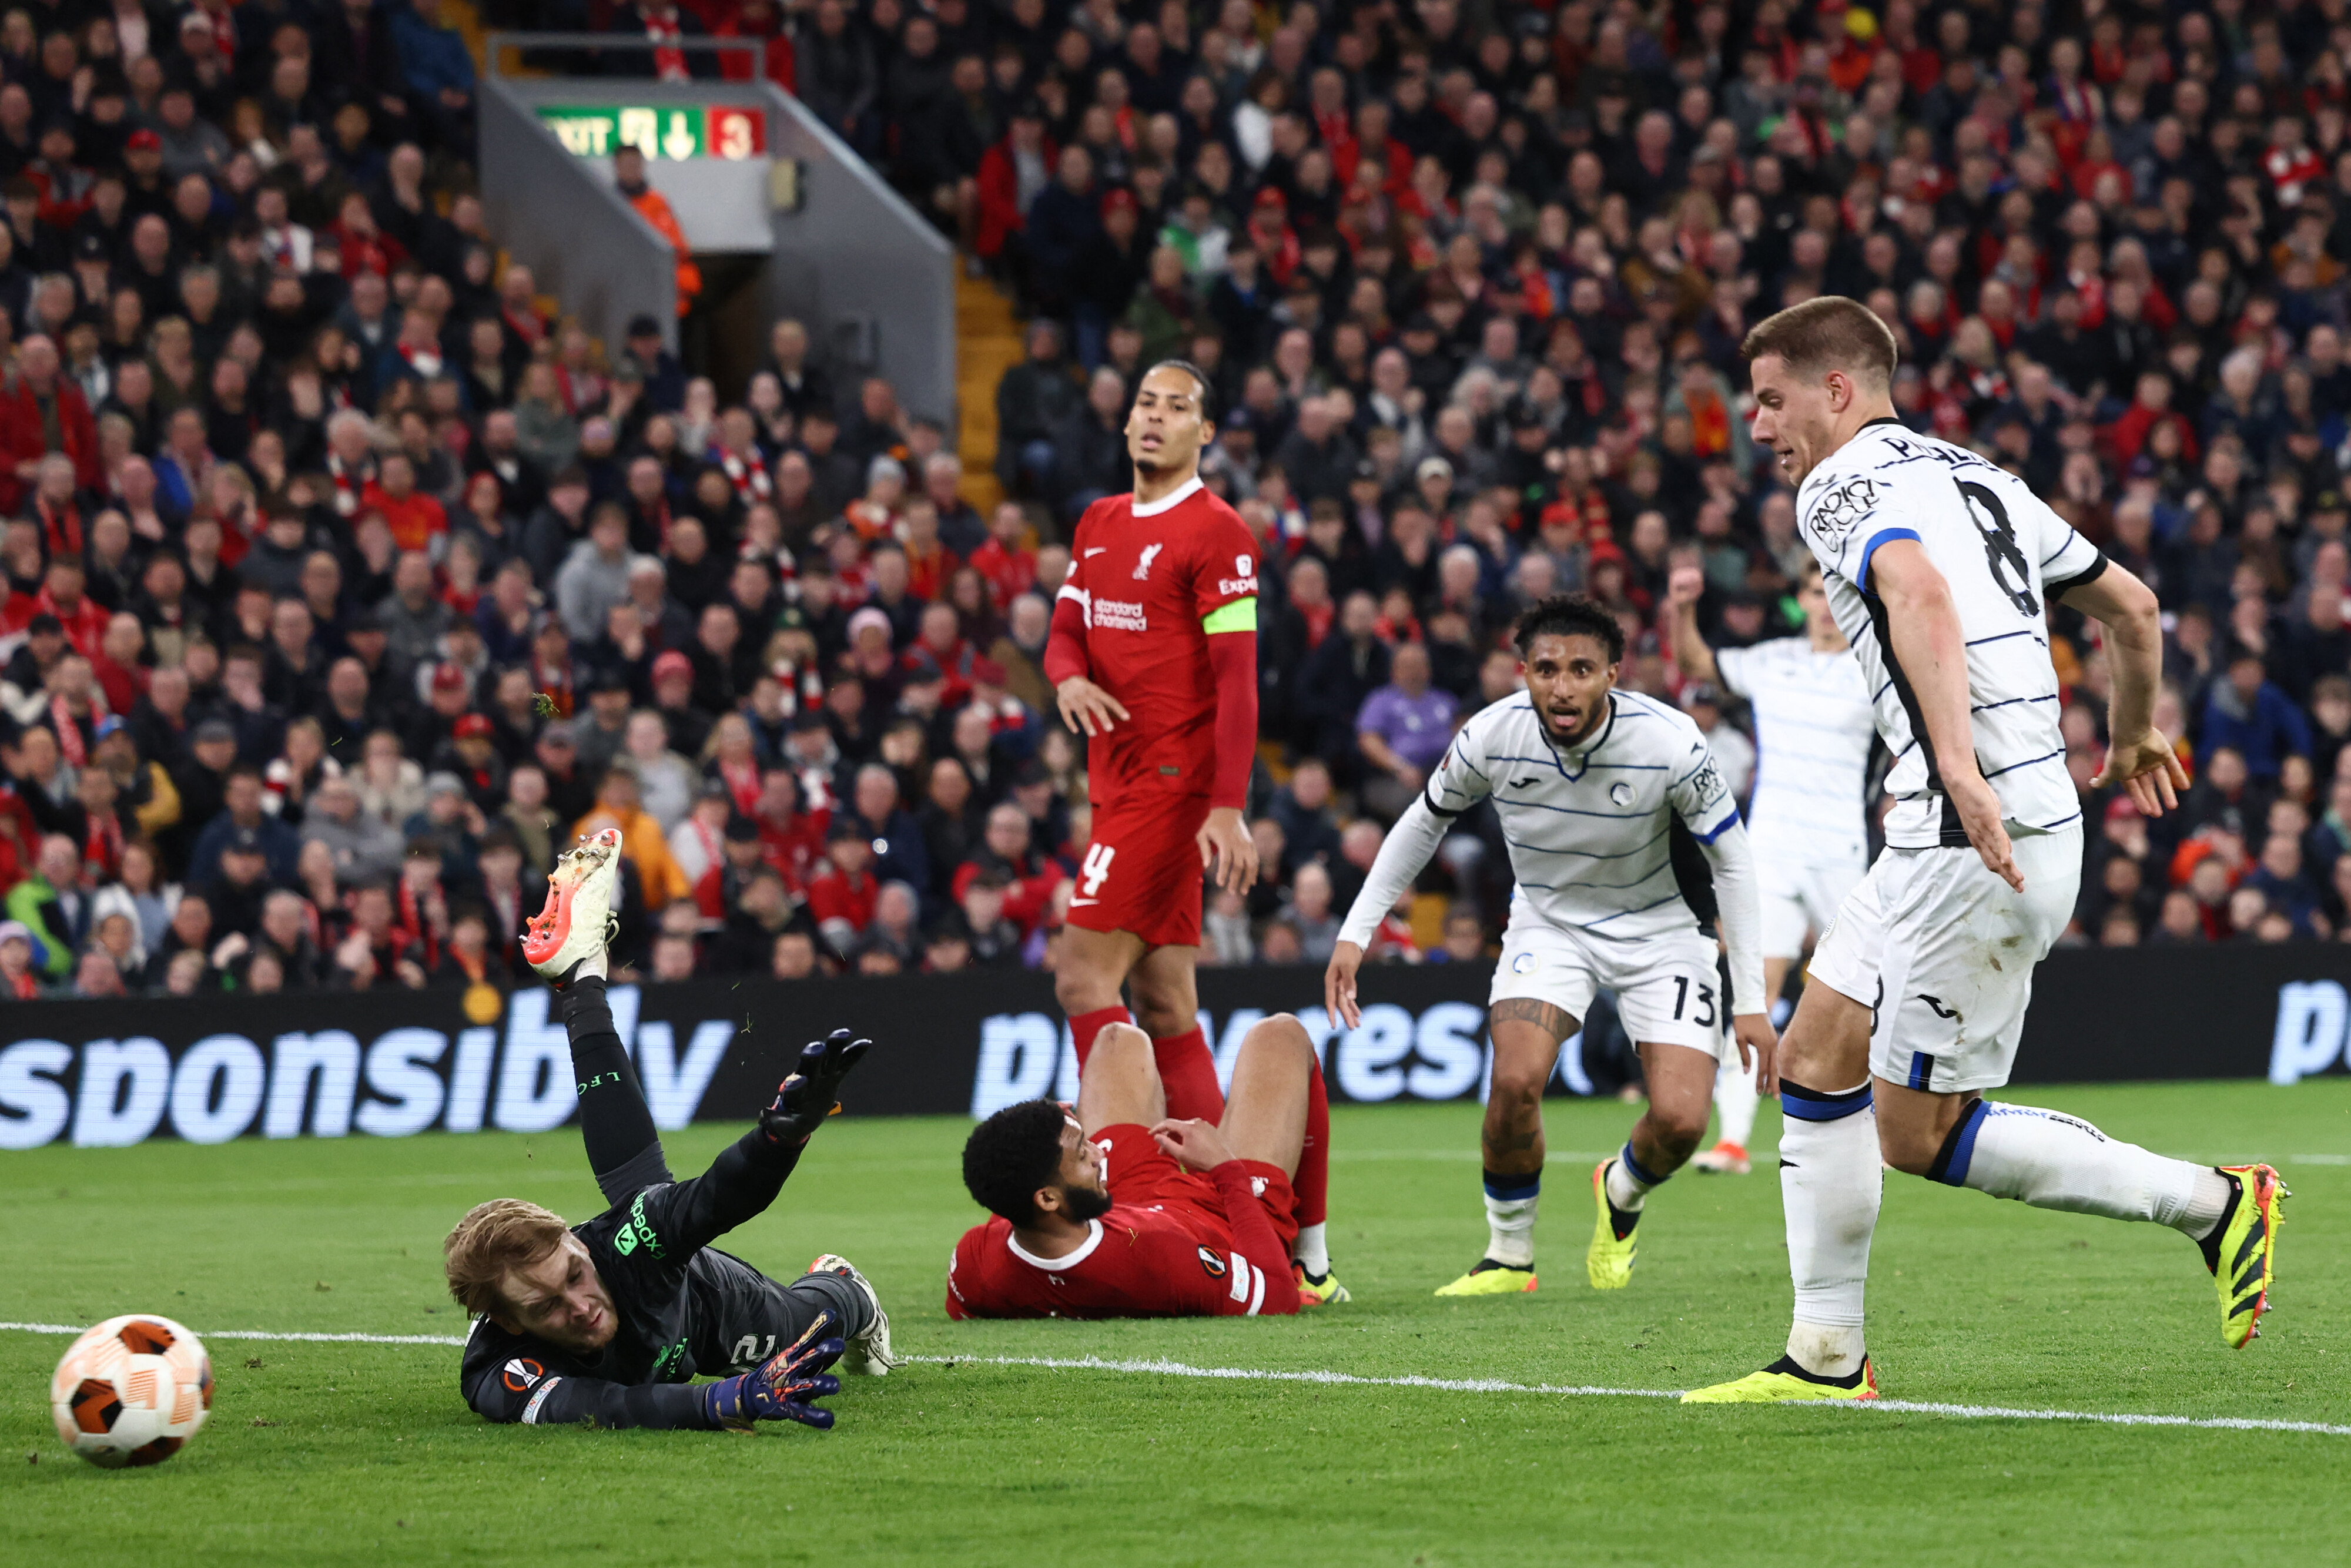 Liverpool's defence could be the reason the Reds won't win the Premier League title.